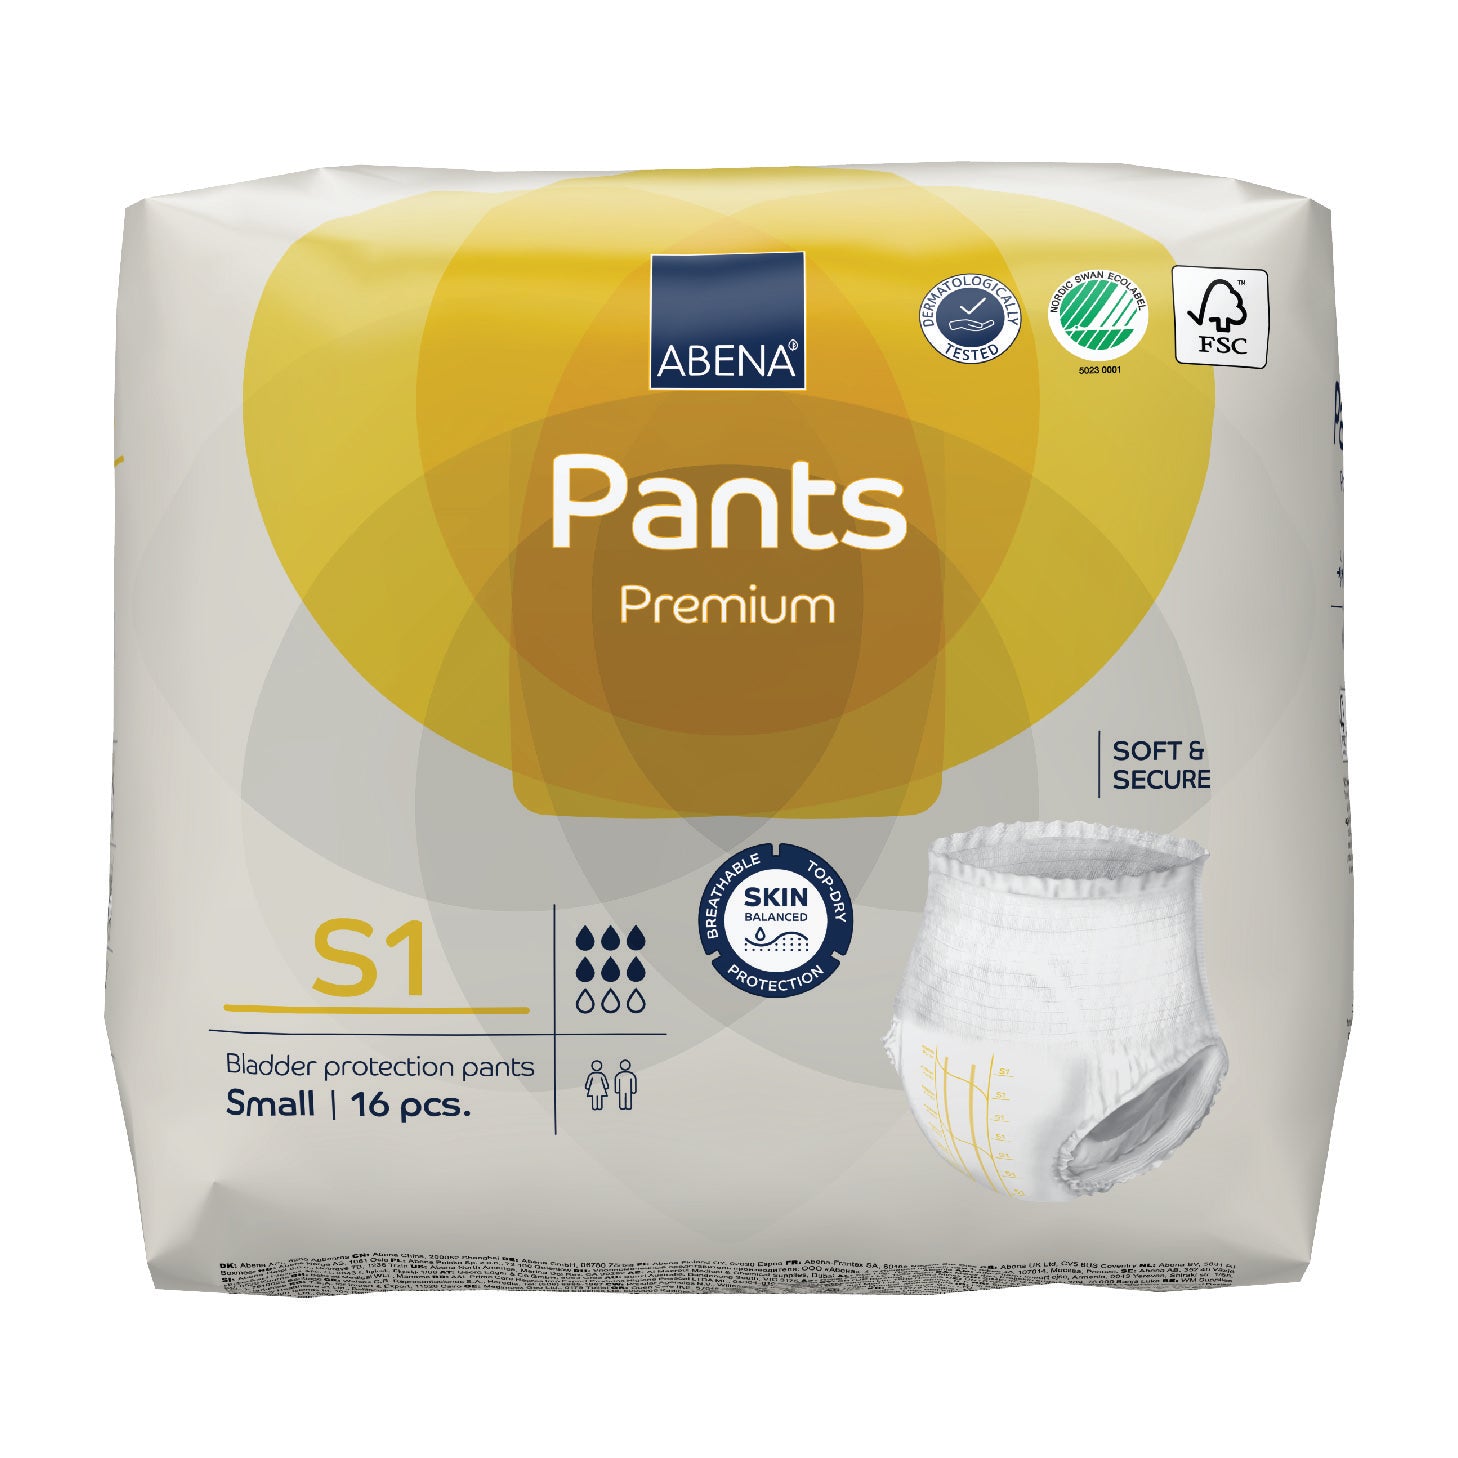 Ultimate Protective Incontinence Underwear Absorbency, Large, 13 units –  Tena : Incontinence